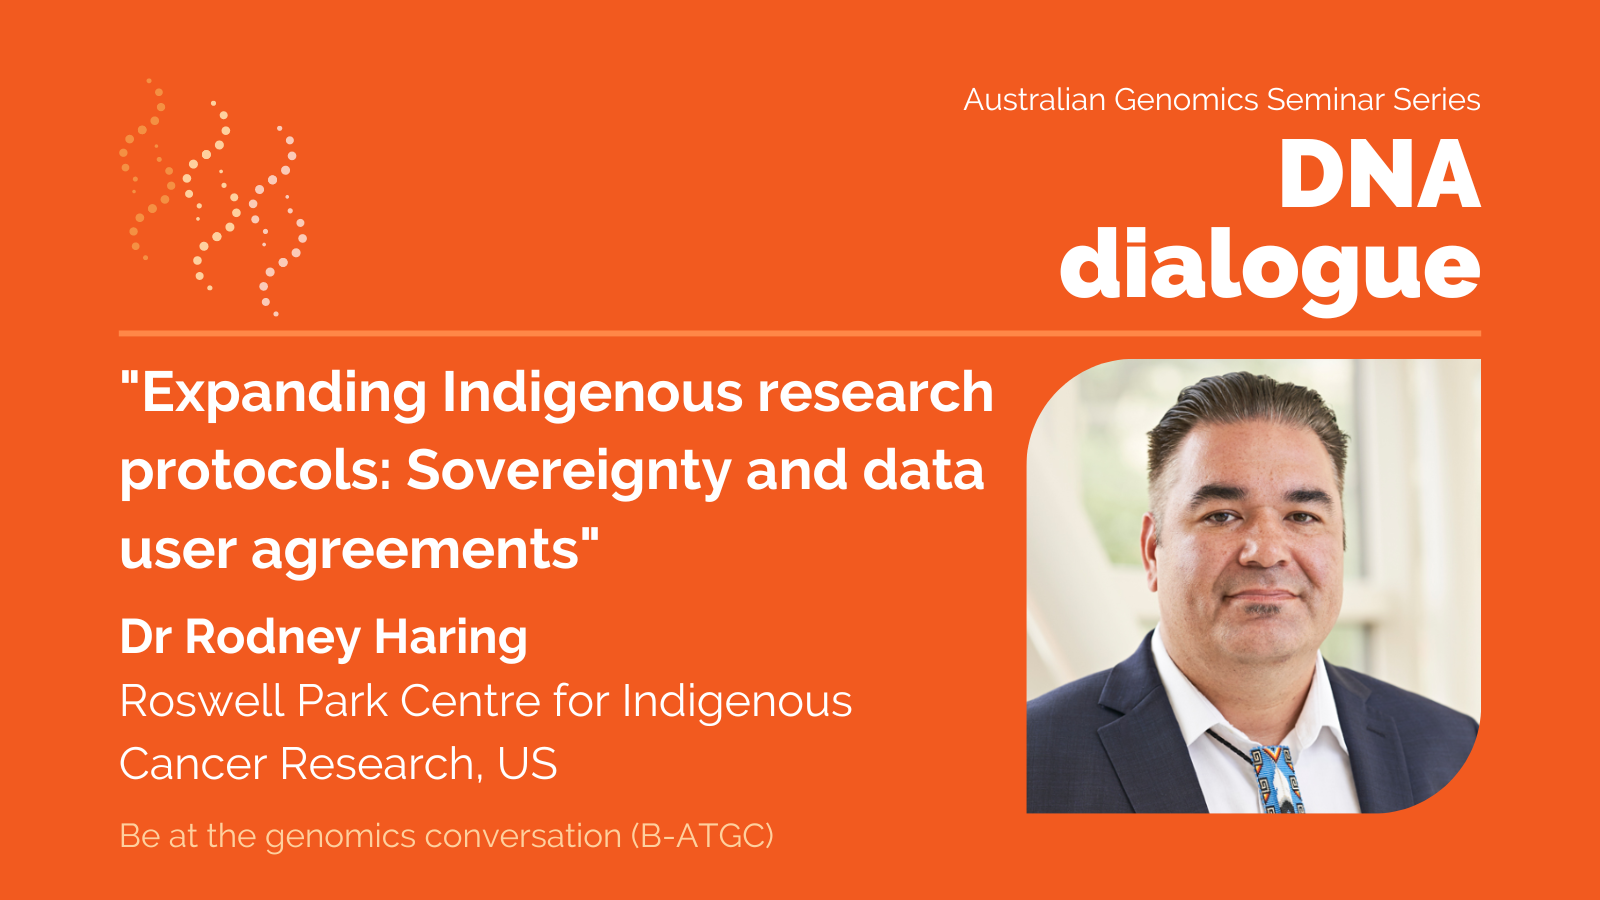 DNA dialogue seminar: "Expanding Indigenous research protocols: Sovereignty and data user agreements”, featuring Dr Rodney Haring, Roswell Park Centre for Indigenous Cancer Research (USA)